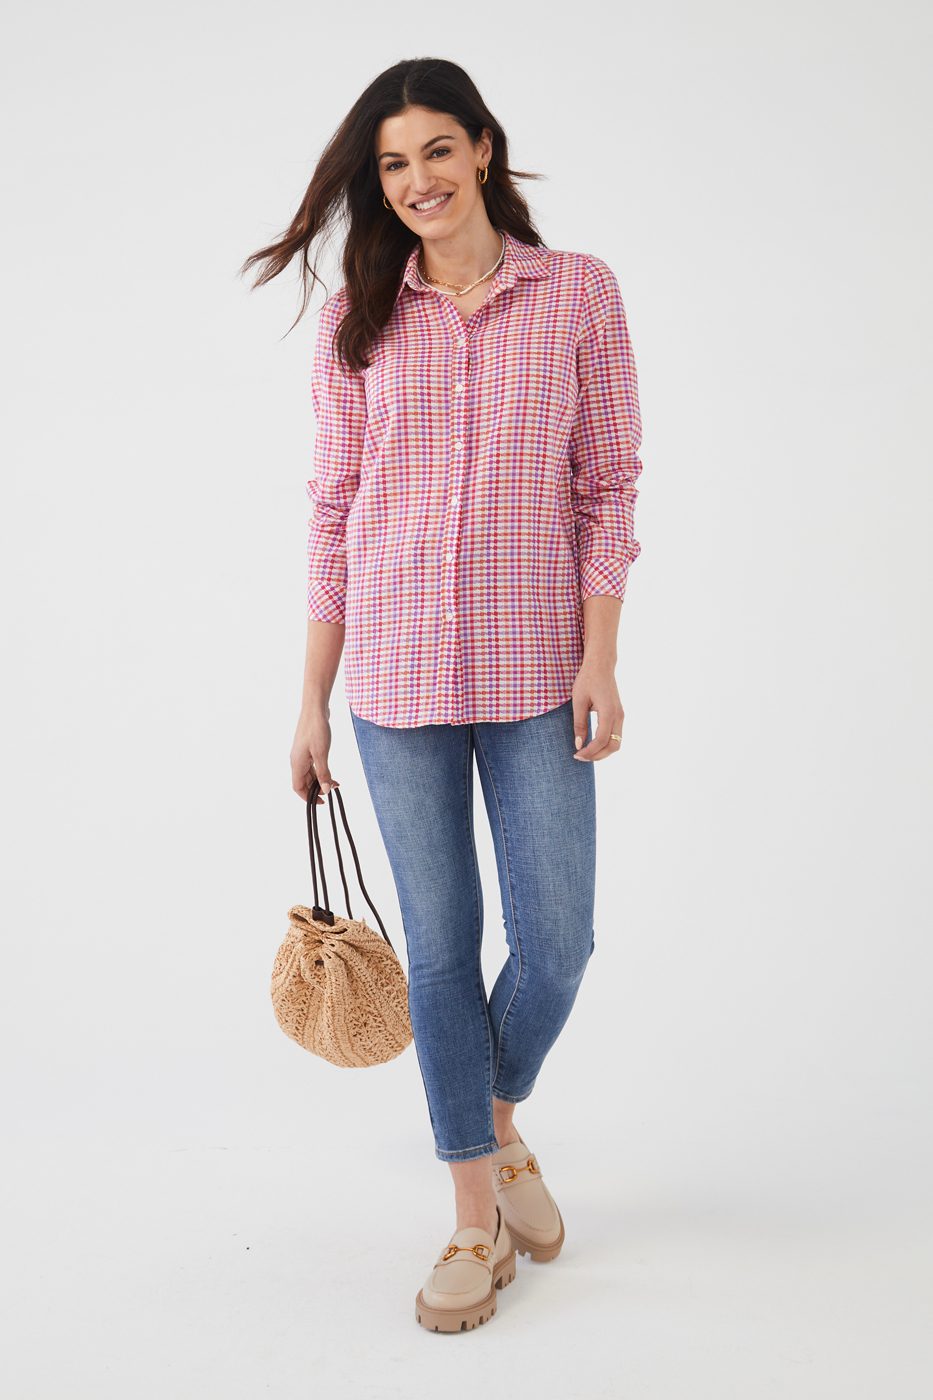 You can never go wrong with a beautiful classic long sleeve shirt.  It is a must have in your wardrobe as it can be styled many different ways, all year long.  Even better, add a long sleeve shirt in multi bright colors.  Our Cameron delivers an eye-catching textured pattern that combines gingham with dots in colors of vivid pink, coral and purple.  Colors- Punch Pink; Pink, white, purple, coral. Textured fabric. Lightweight.